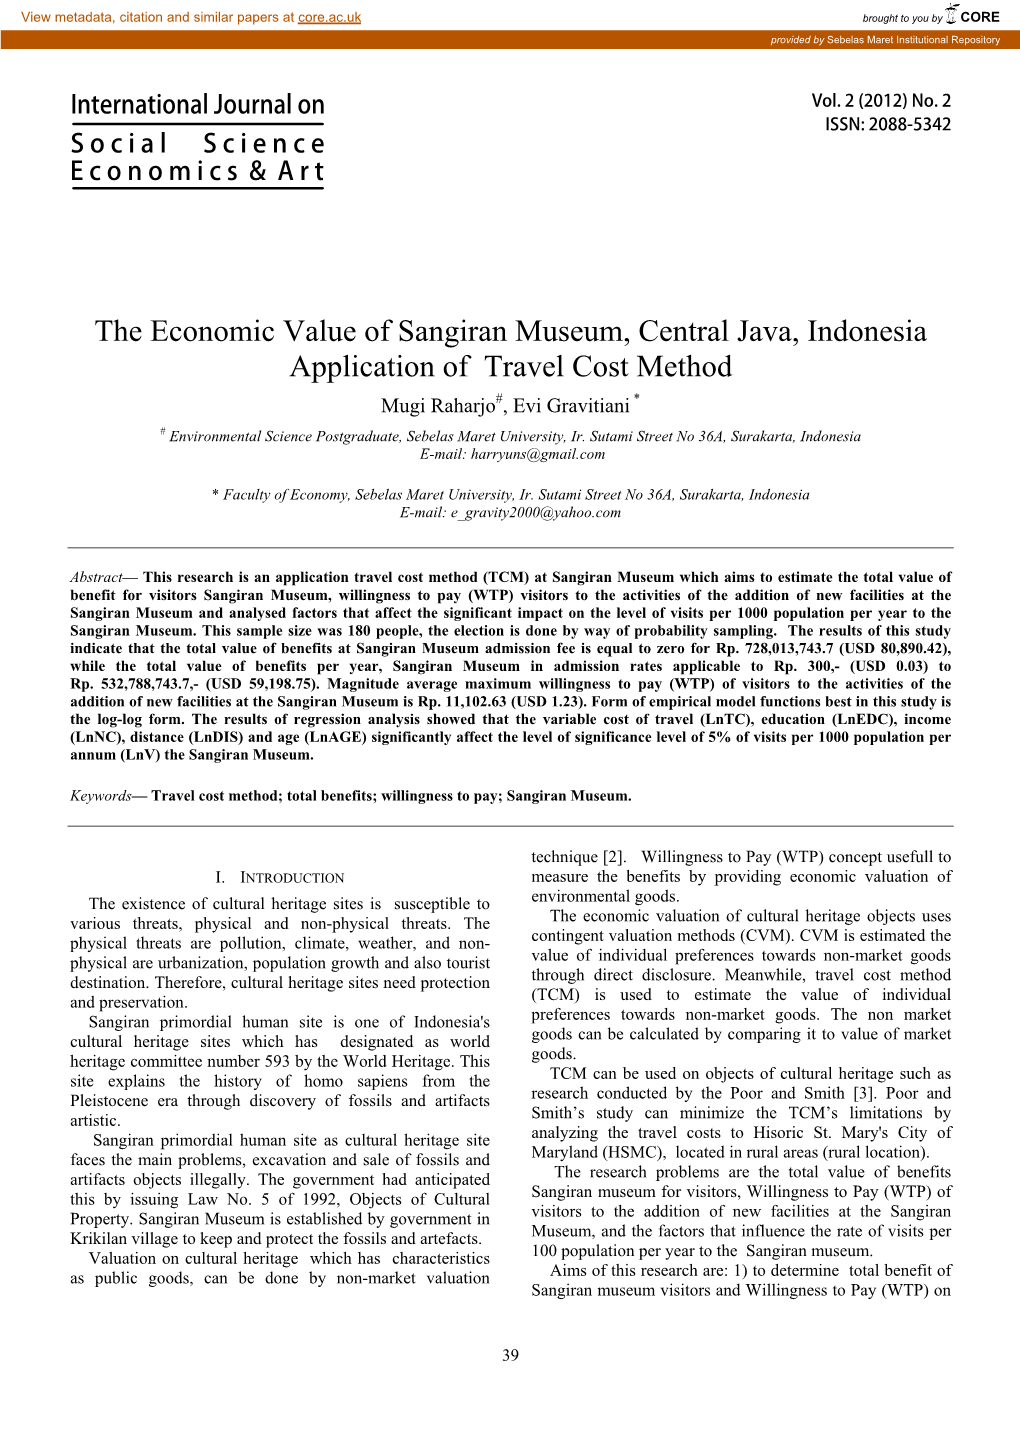 The Economic Value of Sangiran Museum, Central Java, Indonesia Application of Travel Cost Method